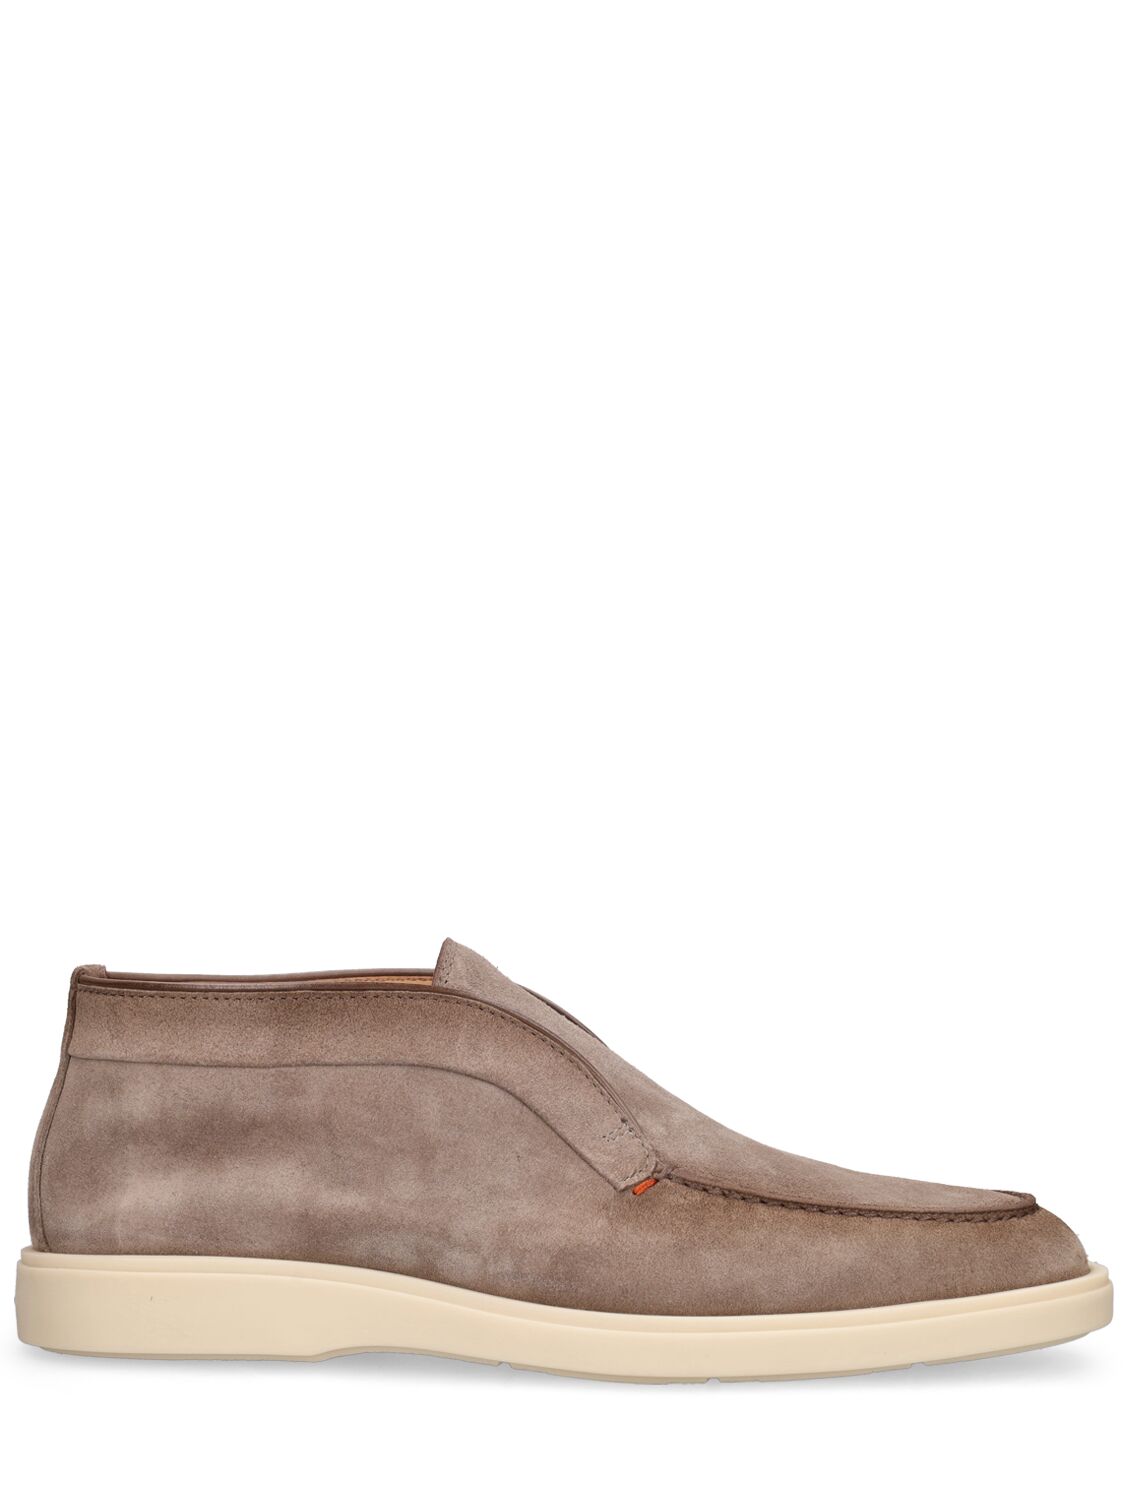 Image of Suede Desert Shoes